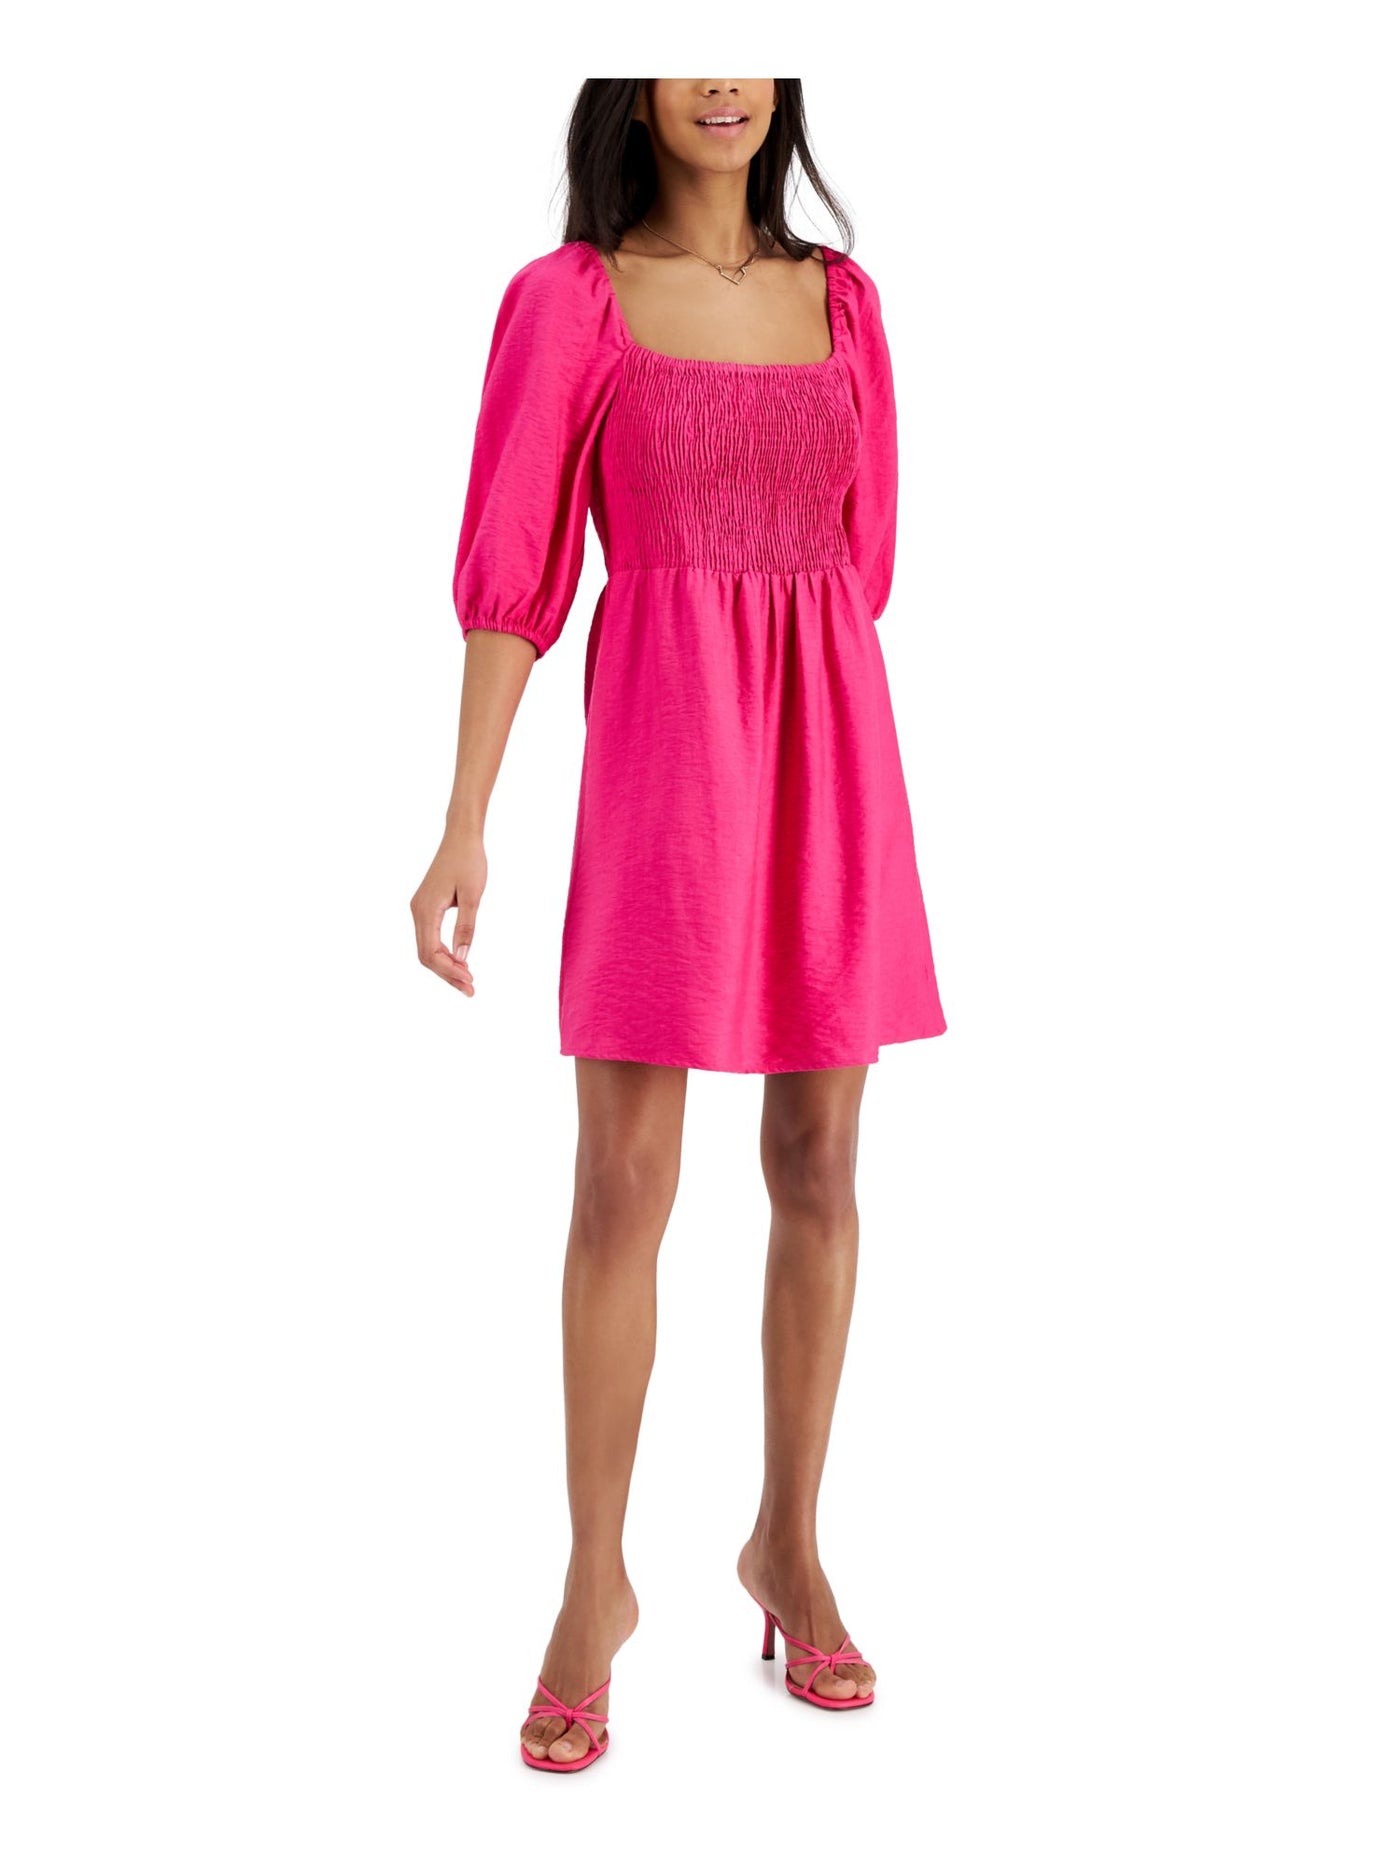 BAR III Womens Pink Smocked Textured Lined Elastic Cuffs Pouf Sleeve Square Neck Above The Knee Fit + Flare Dress S